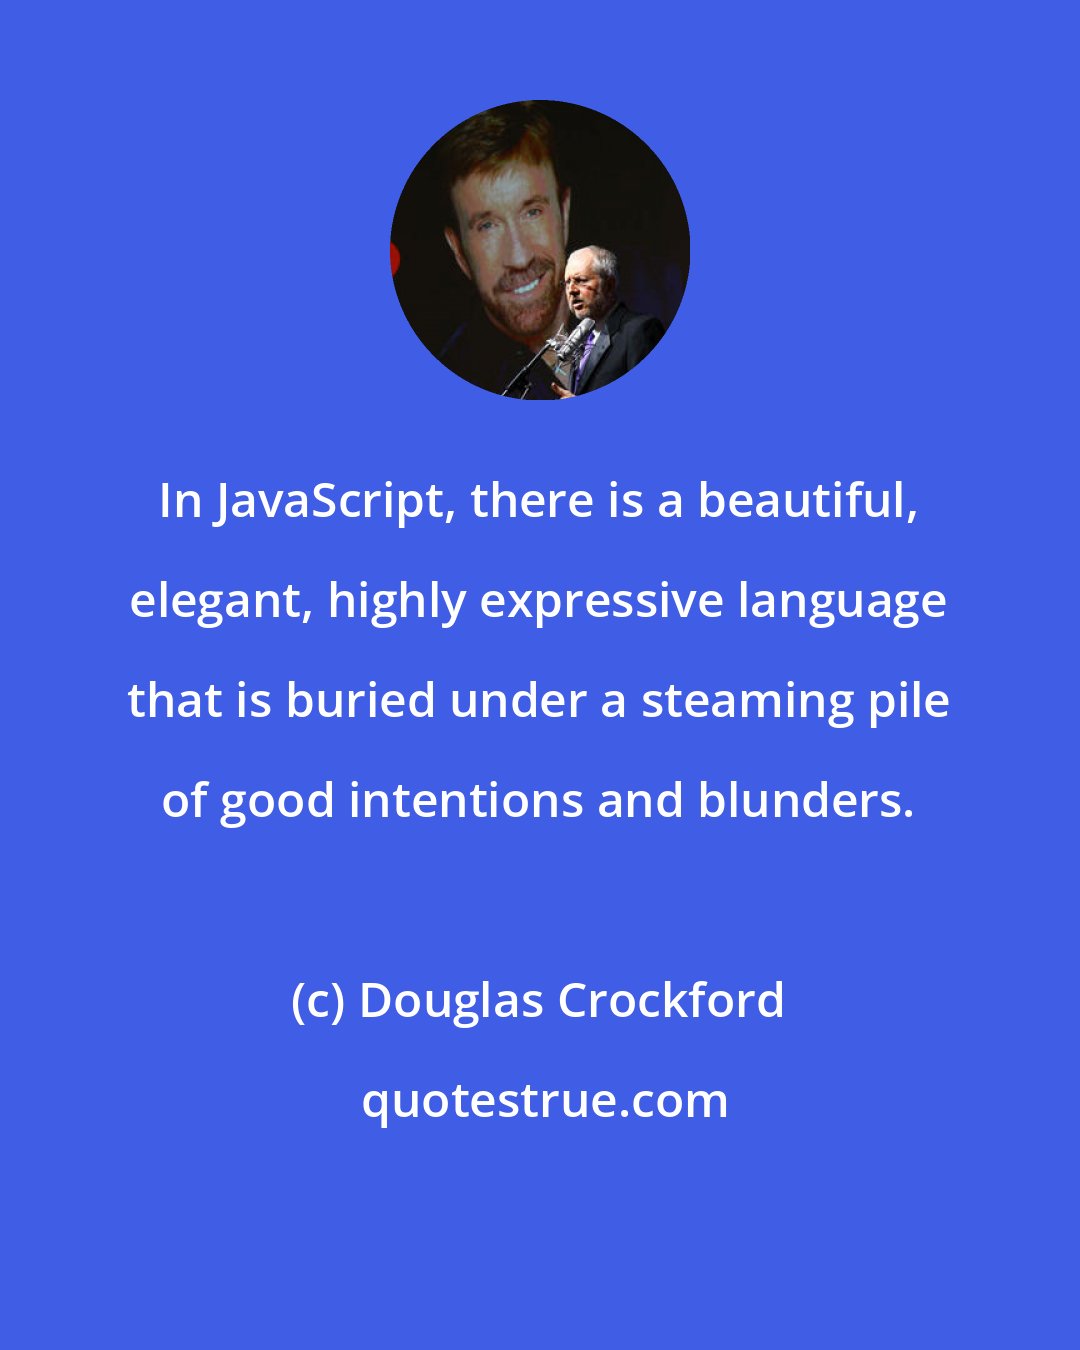 Douglas Crockford: In JavaScript, there is a beautiful, elegant, highly expressive language that is buried under a steaming pile of good intentions and blunders.